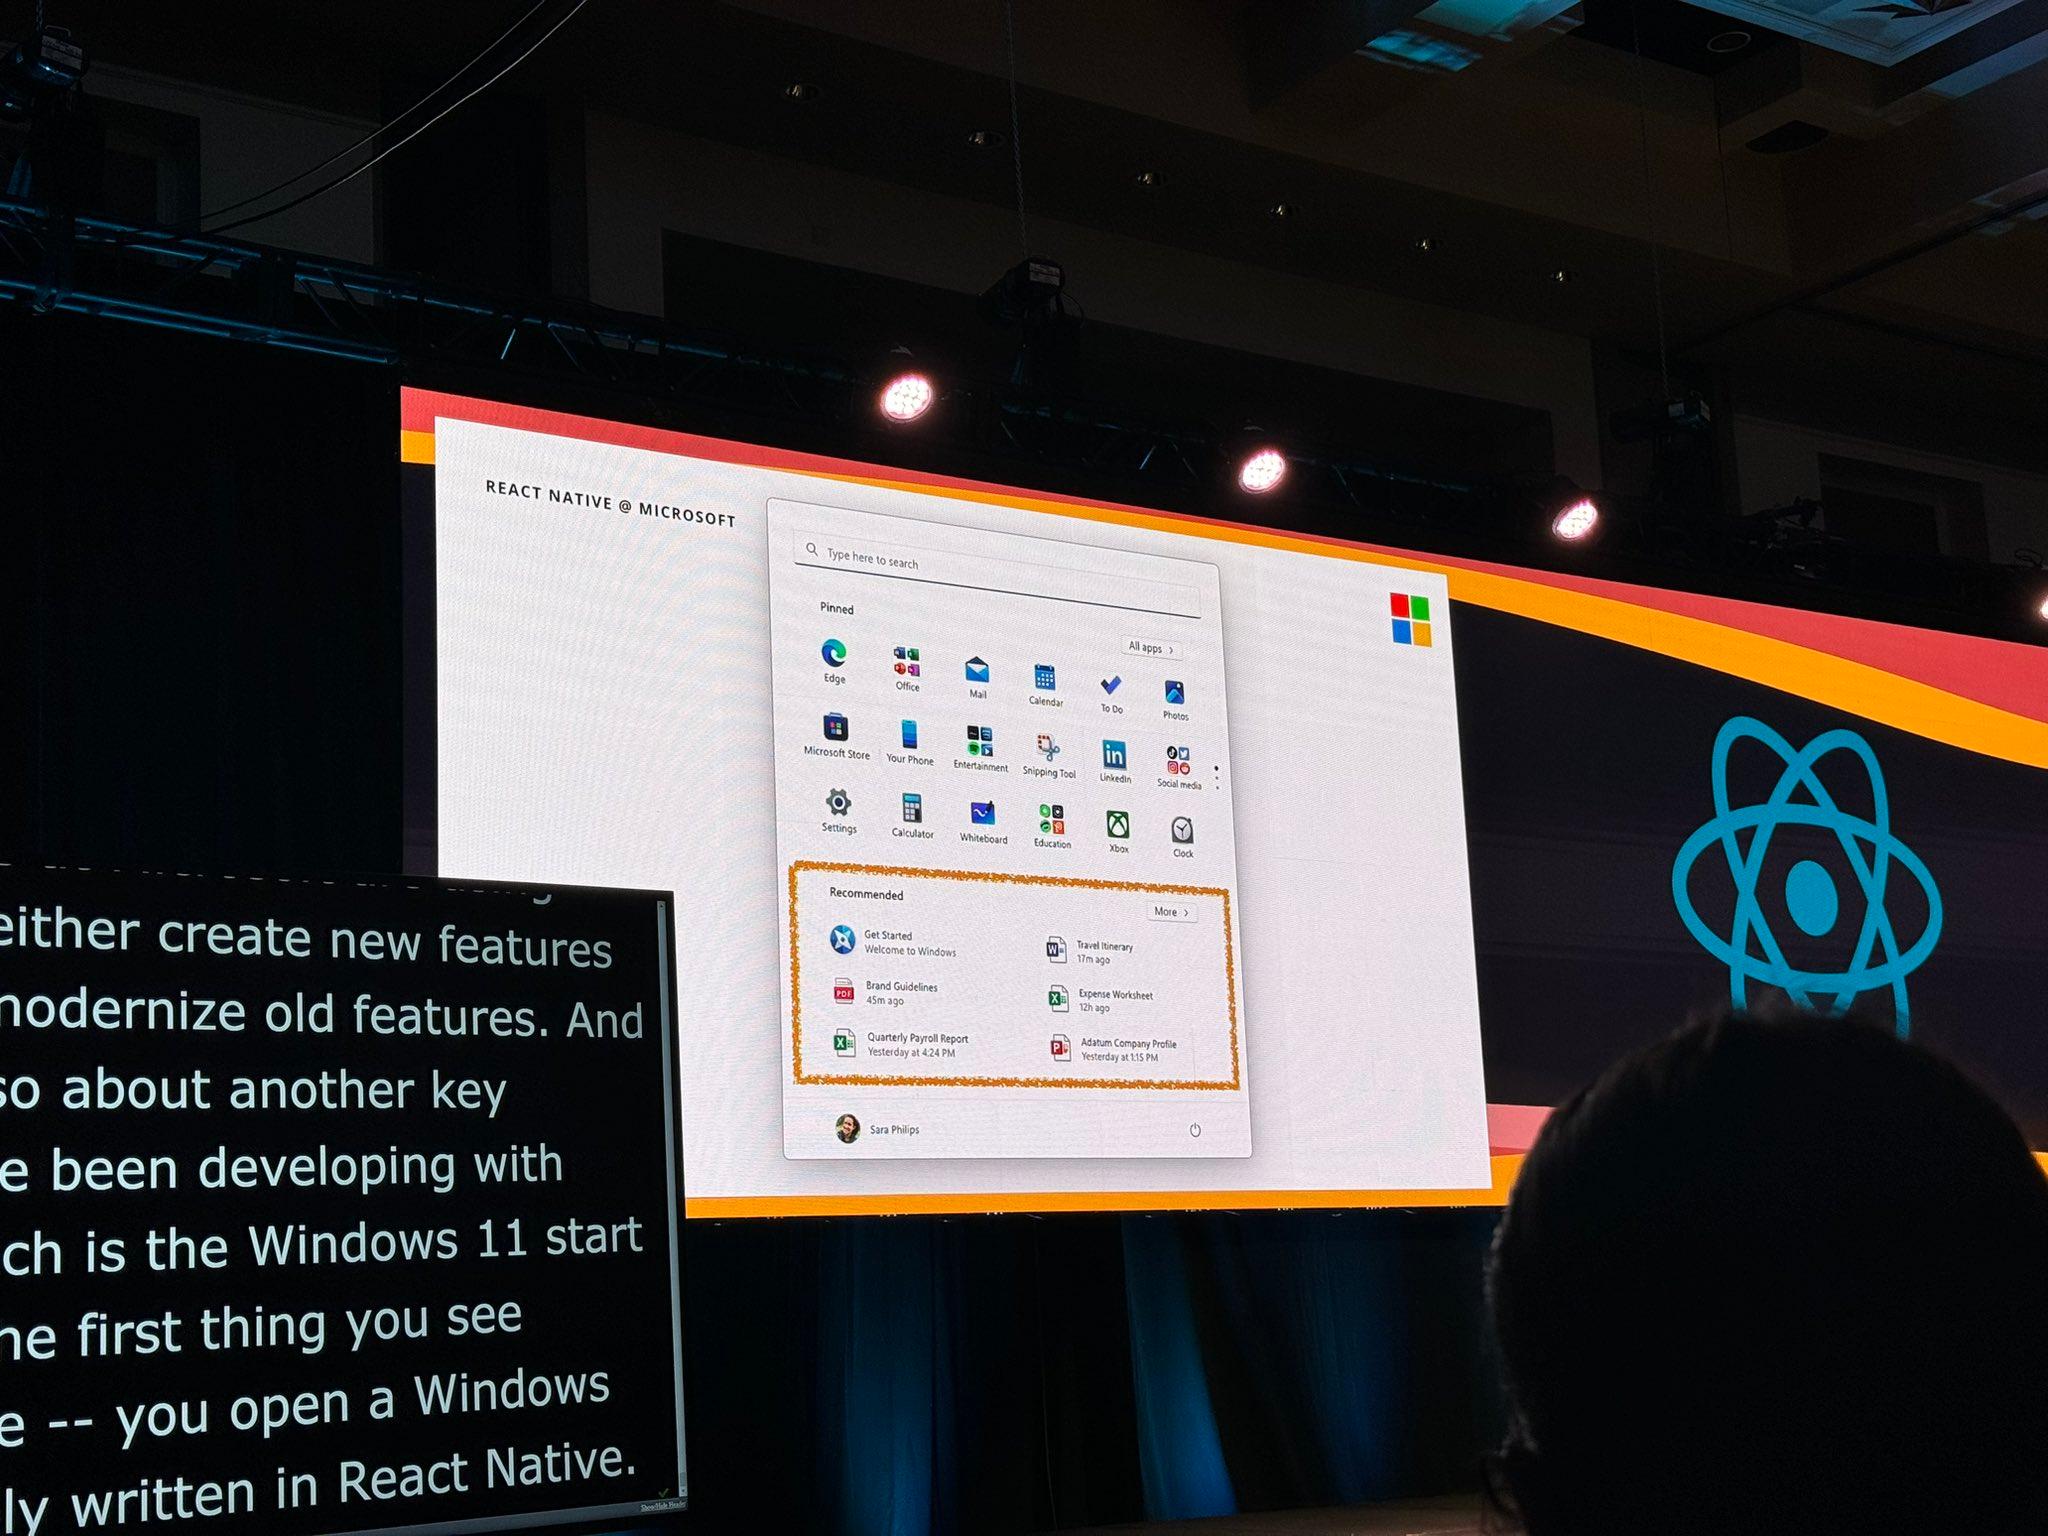 A presentation slide displayed at ReactConf shows a section of the Windows 11 Start menu, highlighting that parts of the system UI are built using React Native. The slide features the React Native logo and a screenshot of the Start menu with pinned apps and recommended items.